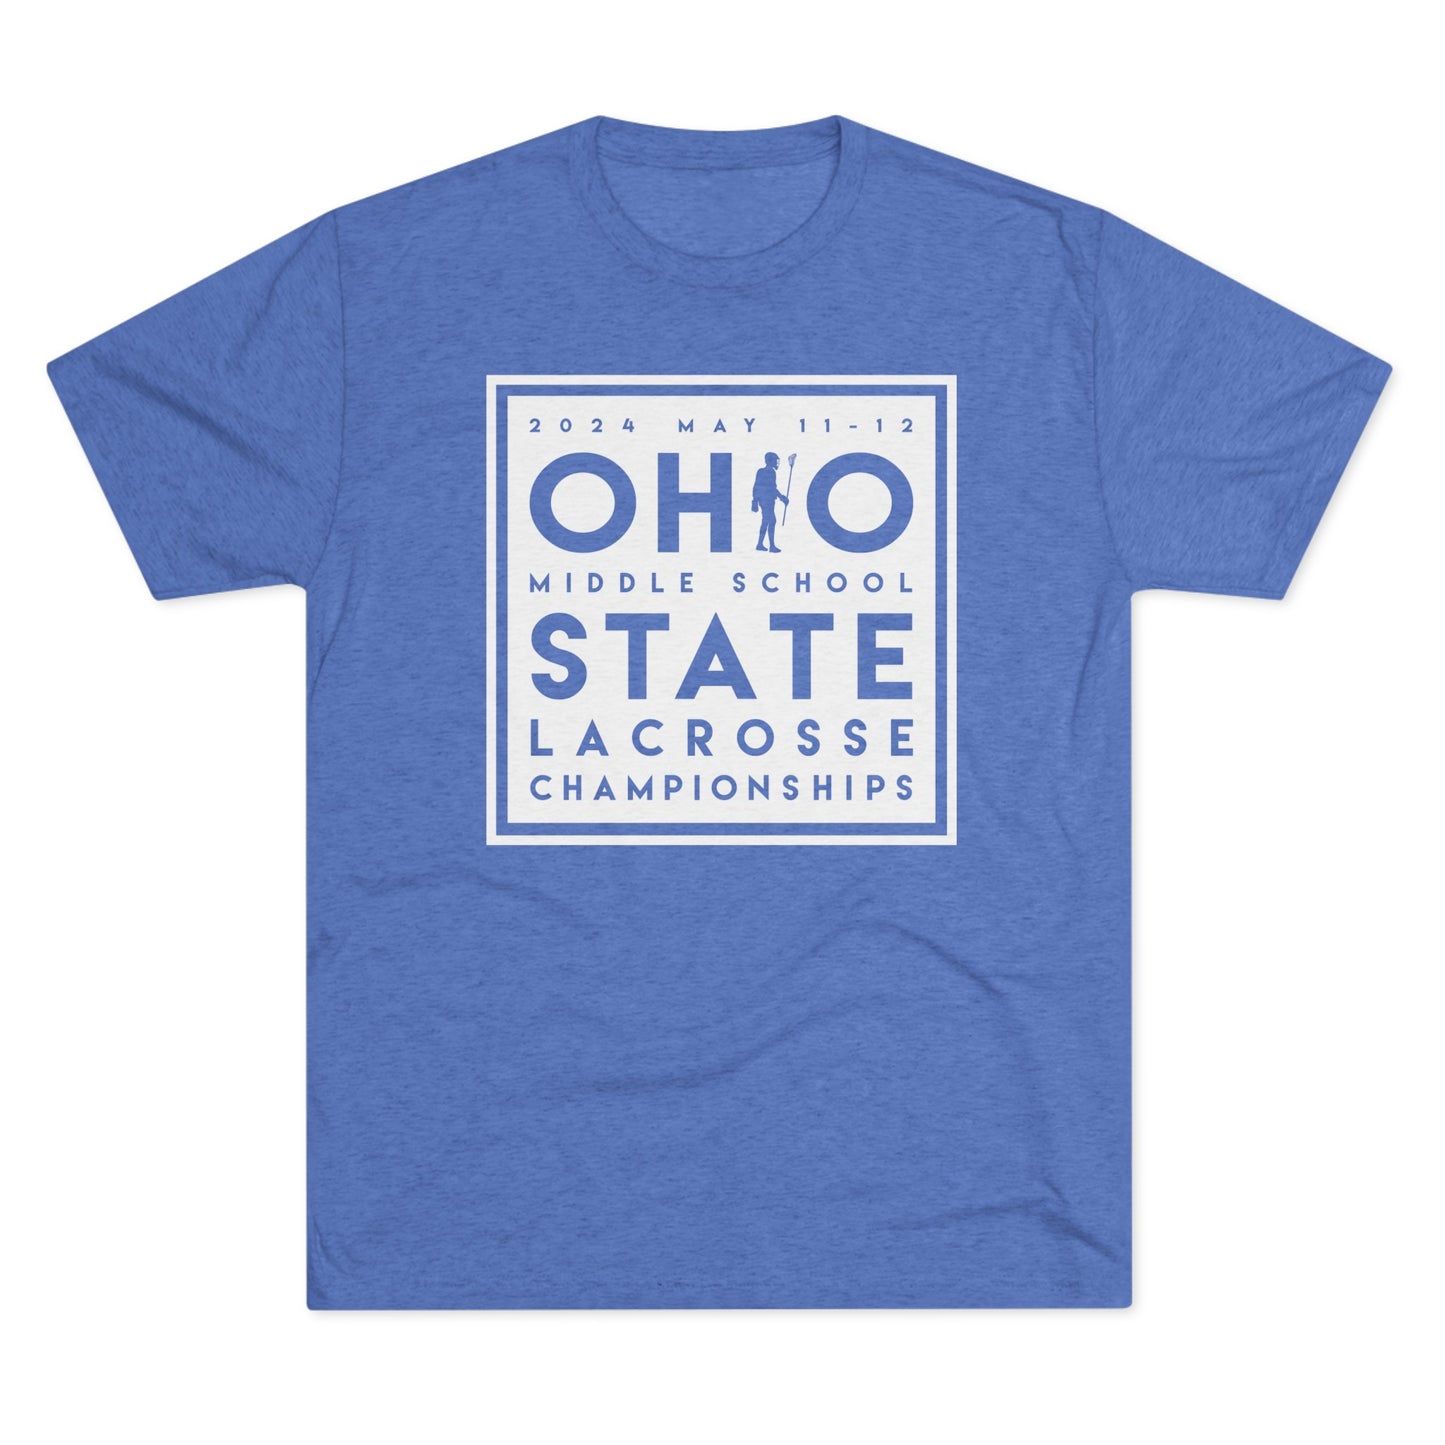 OHIO_PLAYER SUBSTITUTION_2024 STATE MSLC-Unisex Tri-Blend Crew Tee